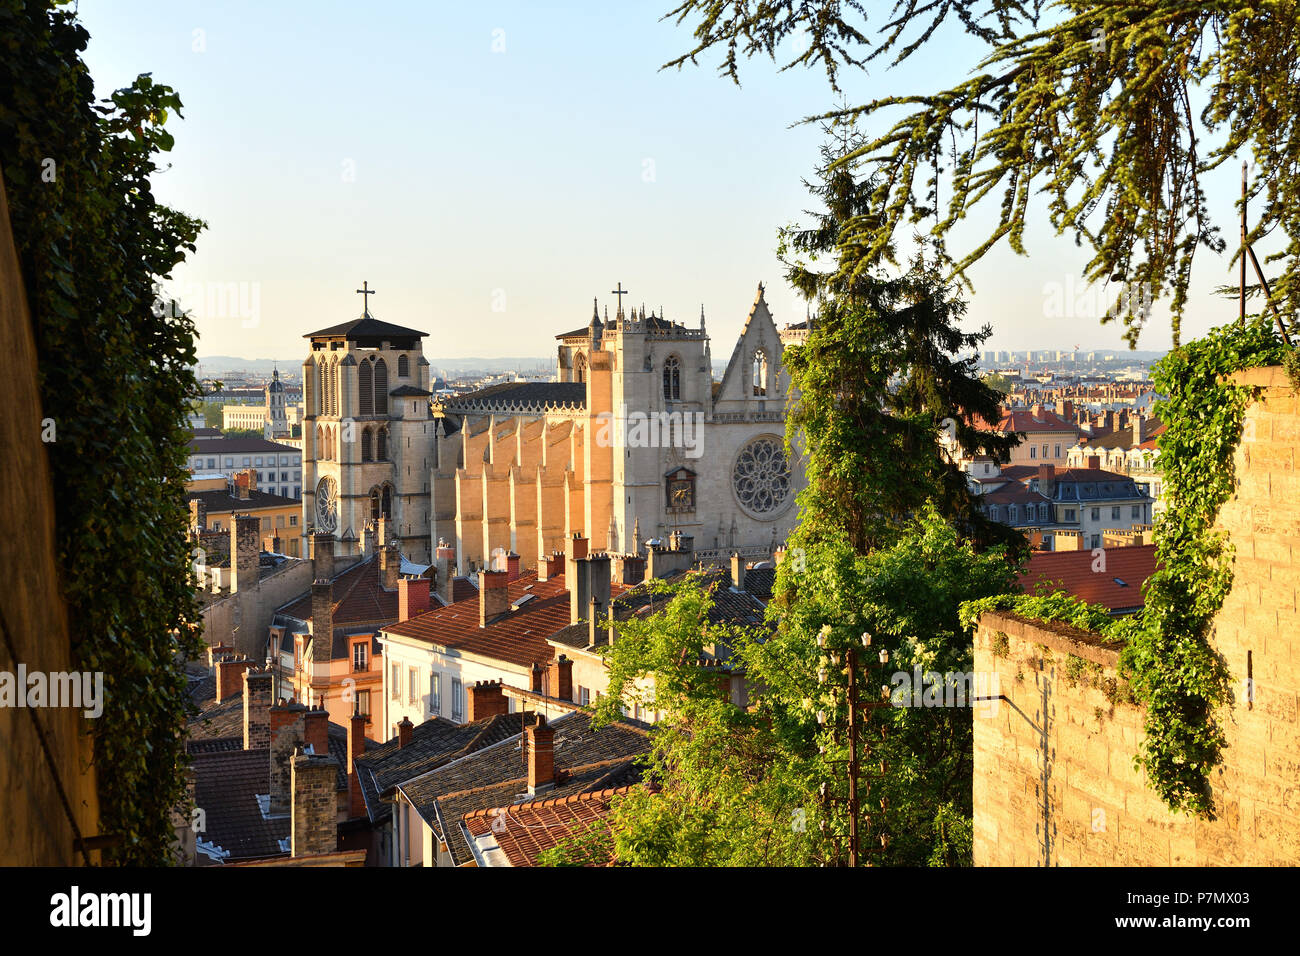 France, Rhone, Lyon, historical site listed as World Heritage by UNESCO, Vieux Lyon (Old Town), Saint Jean Cathedral (Saint John's Cathedral) Stock Photo